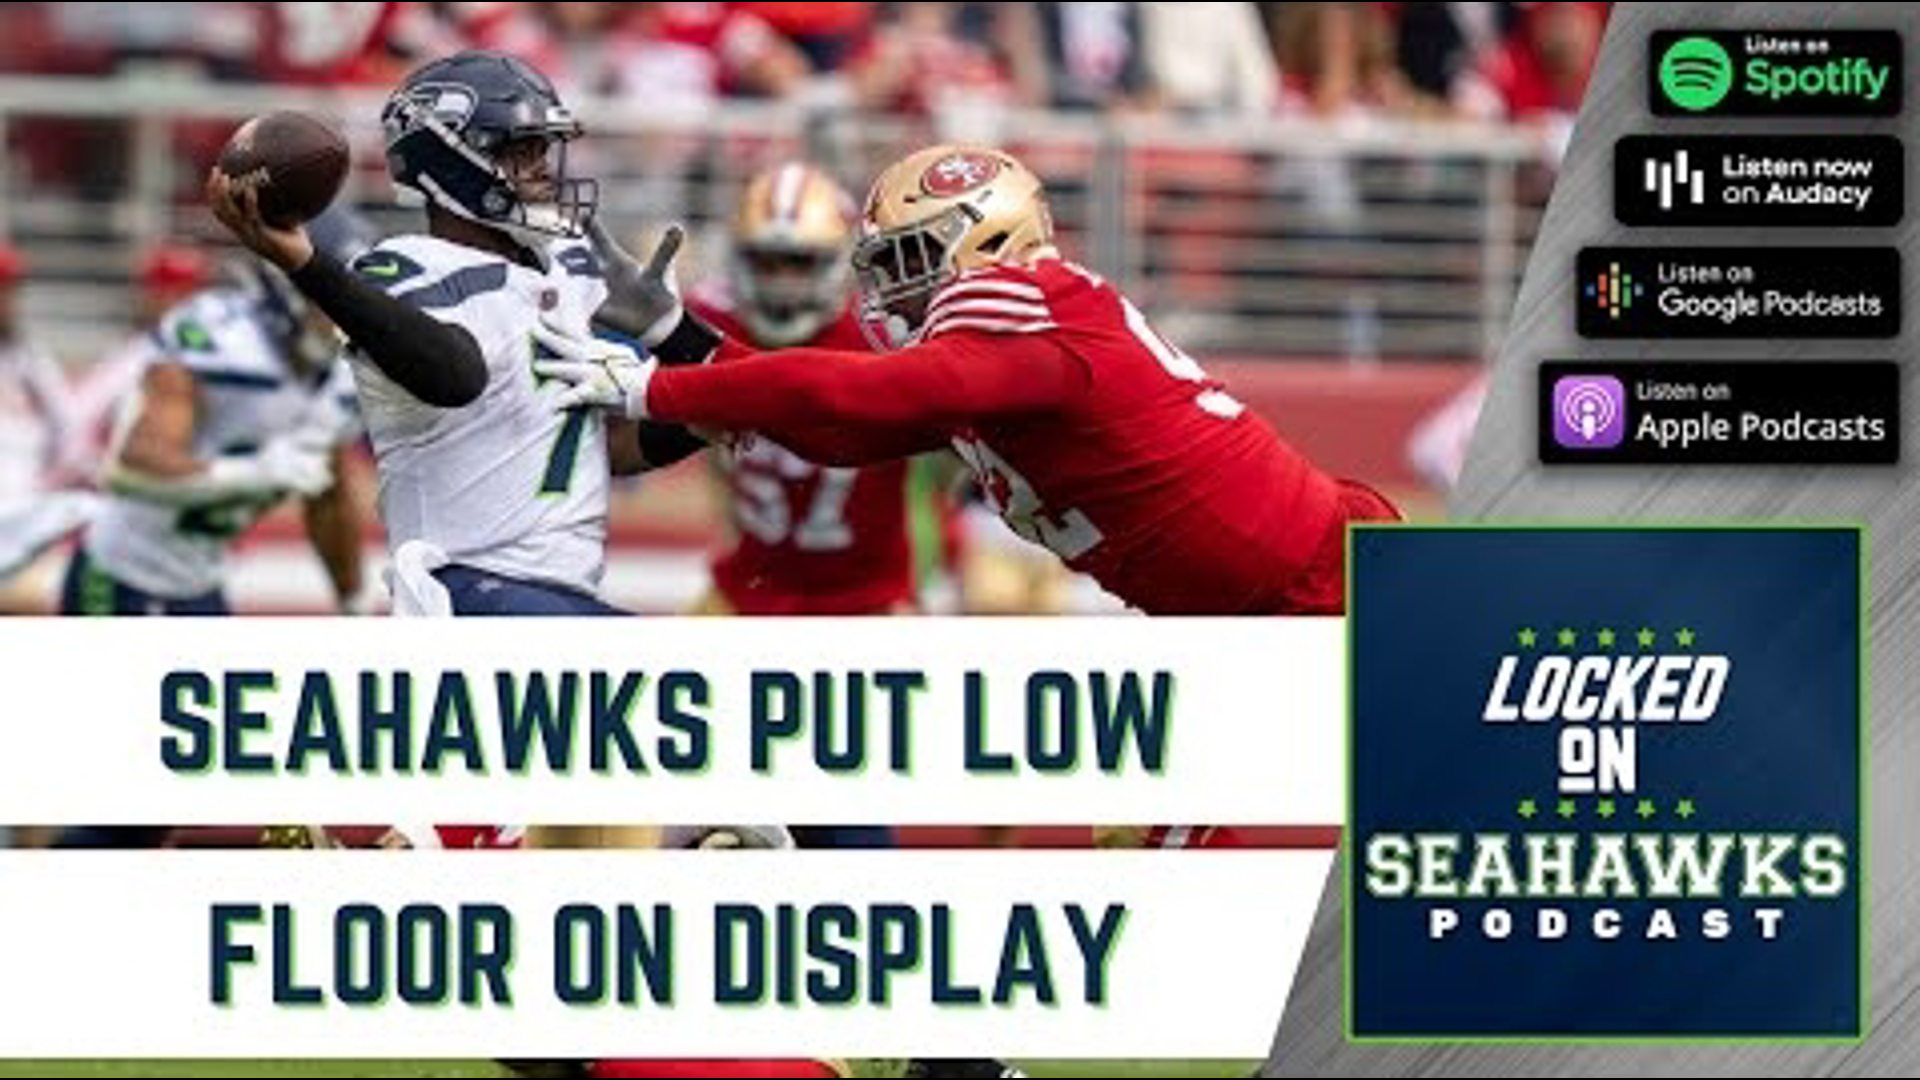 One week after pulling off a huge upset against Russell Wilson and the Broncos, the Seahawks had embarrassing road loss to the 49ers to fall back to 1-1 on the seaso